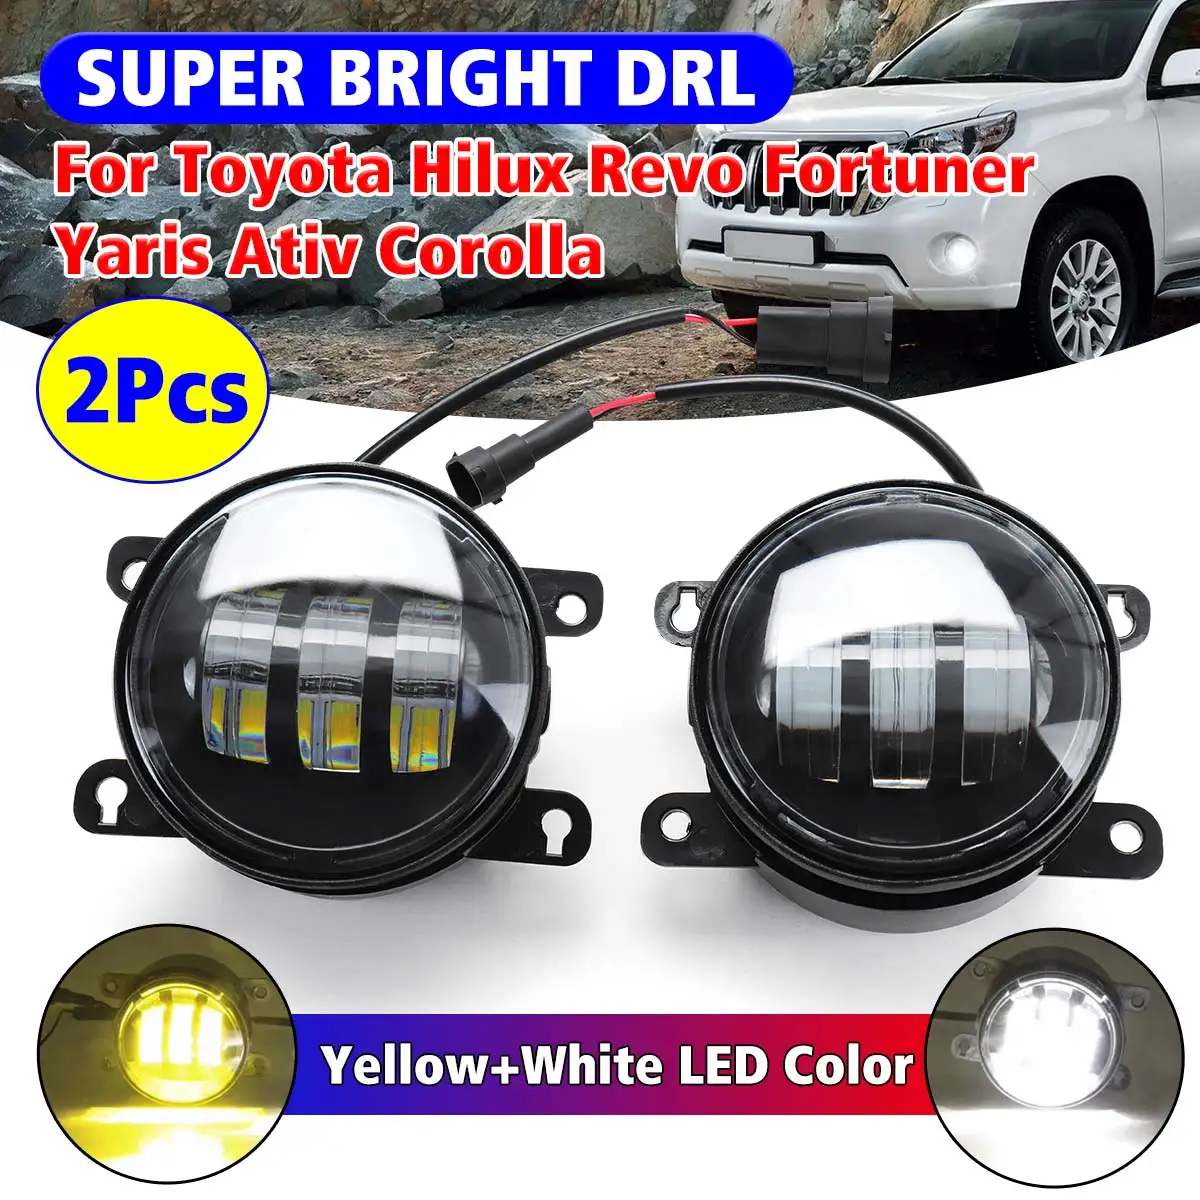 

2x 4 Inch Car Drl Led Daytime Running Light Dual Color IP67 Waterproof for Toyota Corolla for Hilux for Revo Fortuner Yaris Ativ